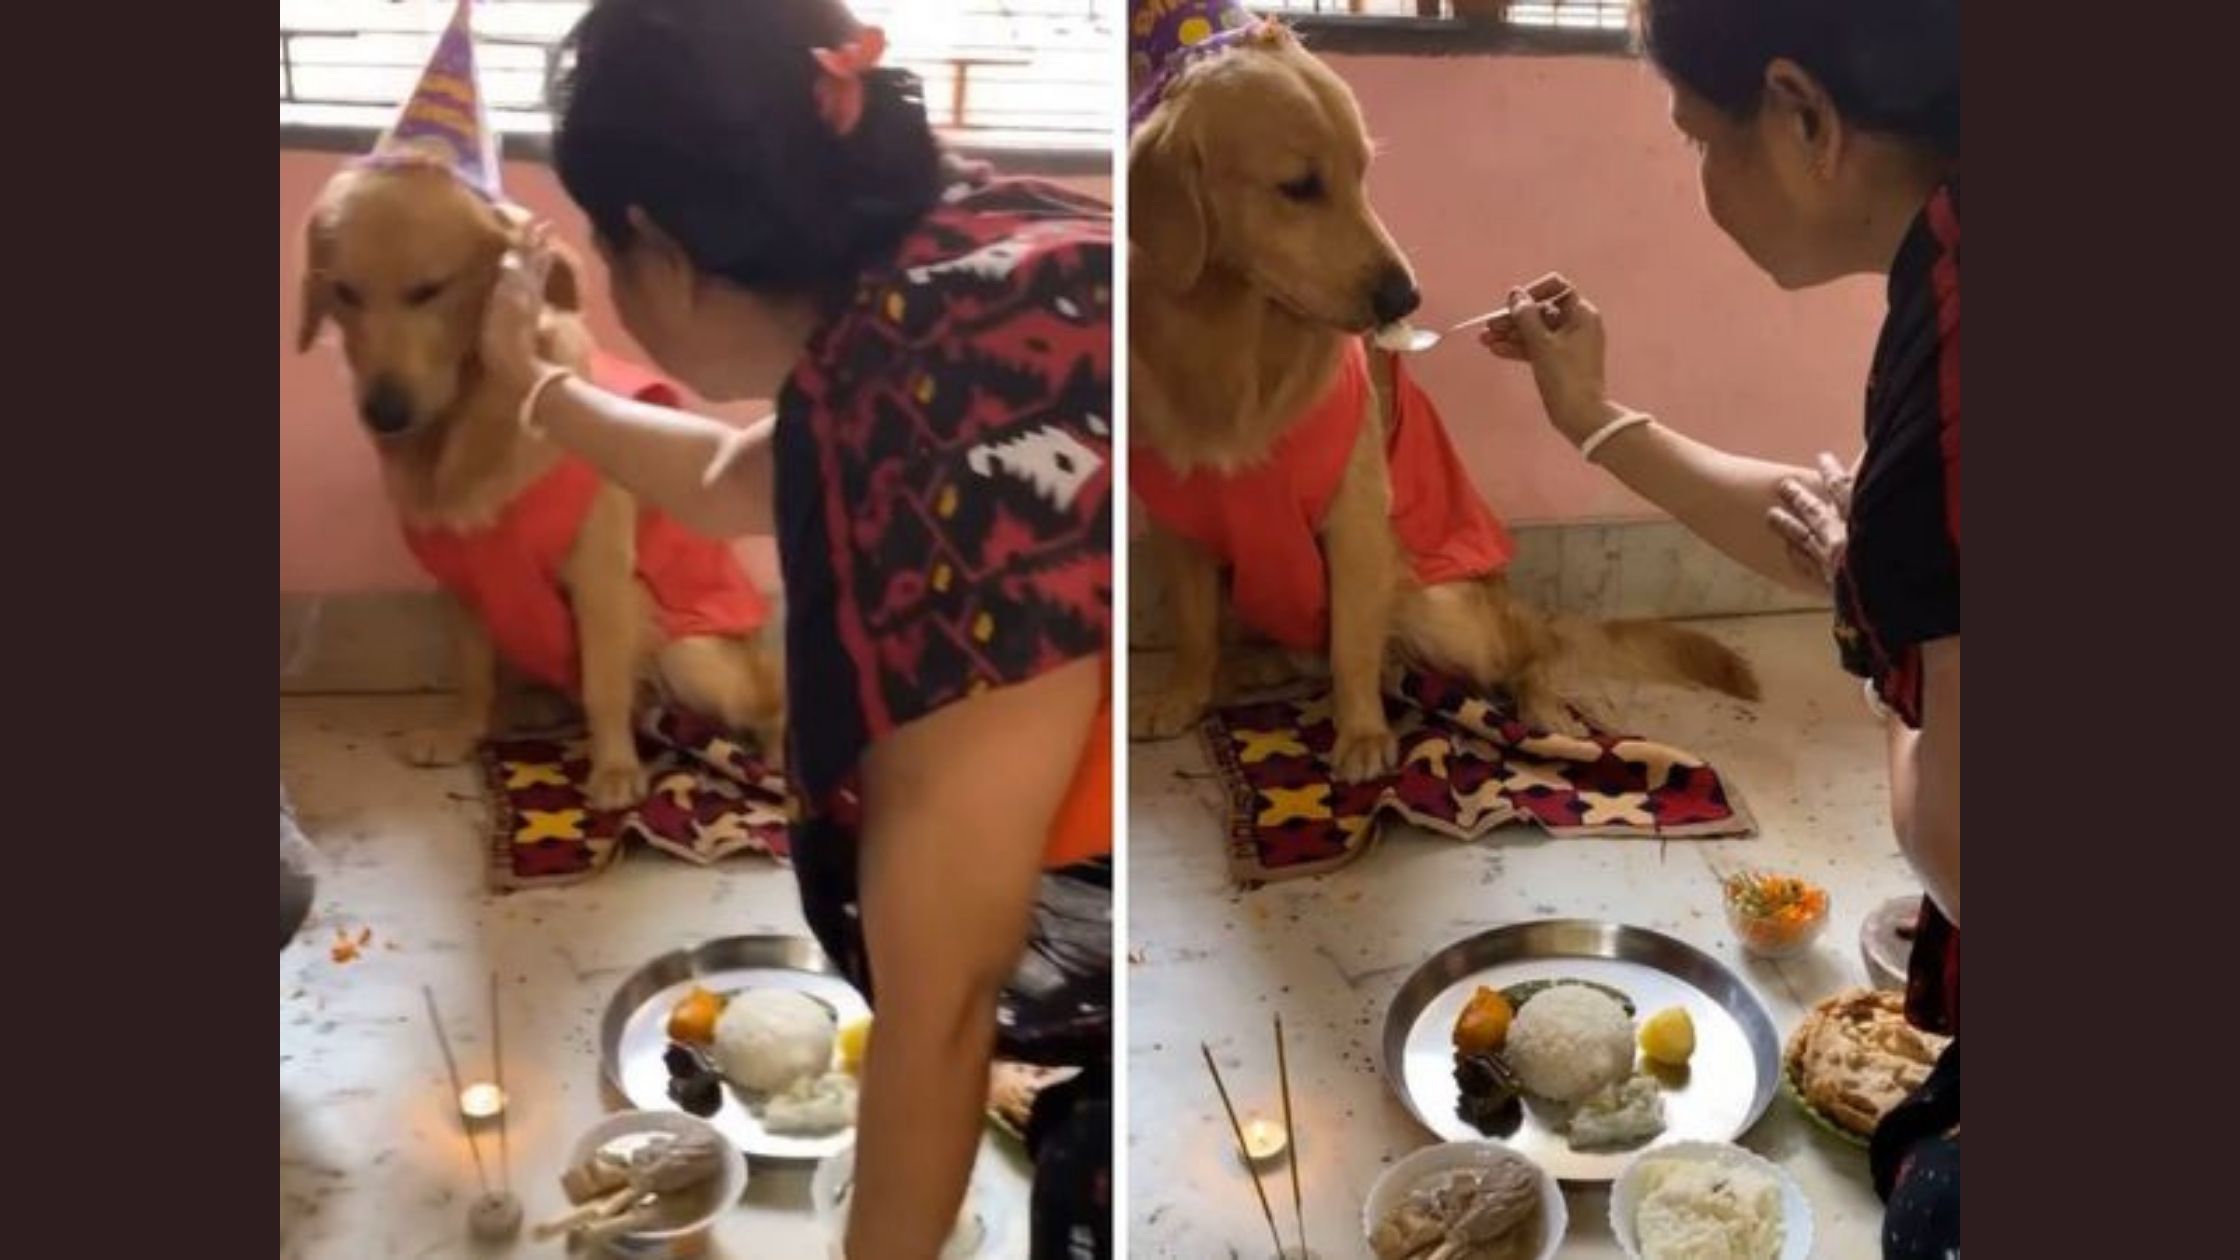 ‘Gogo’ the pet gets a wholesome birthday party